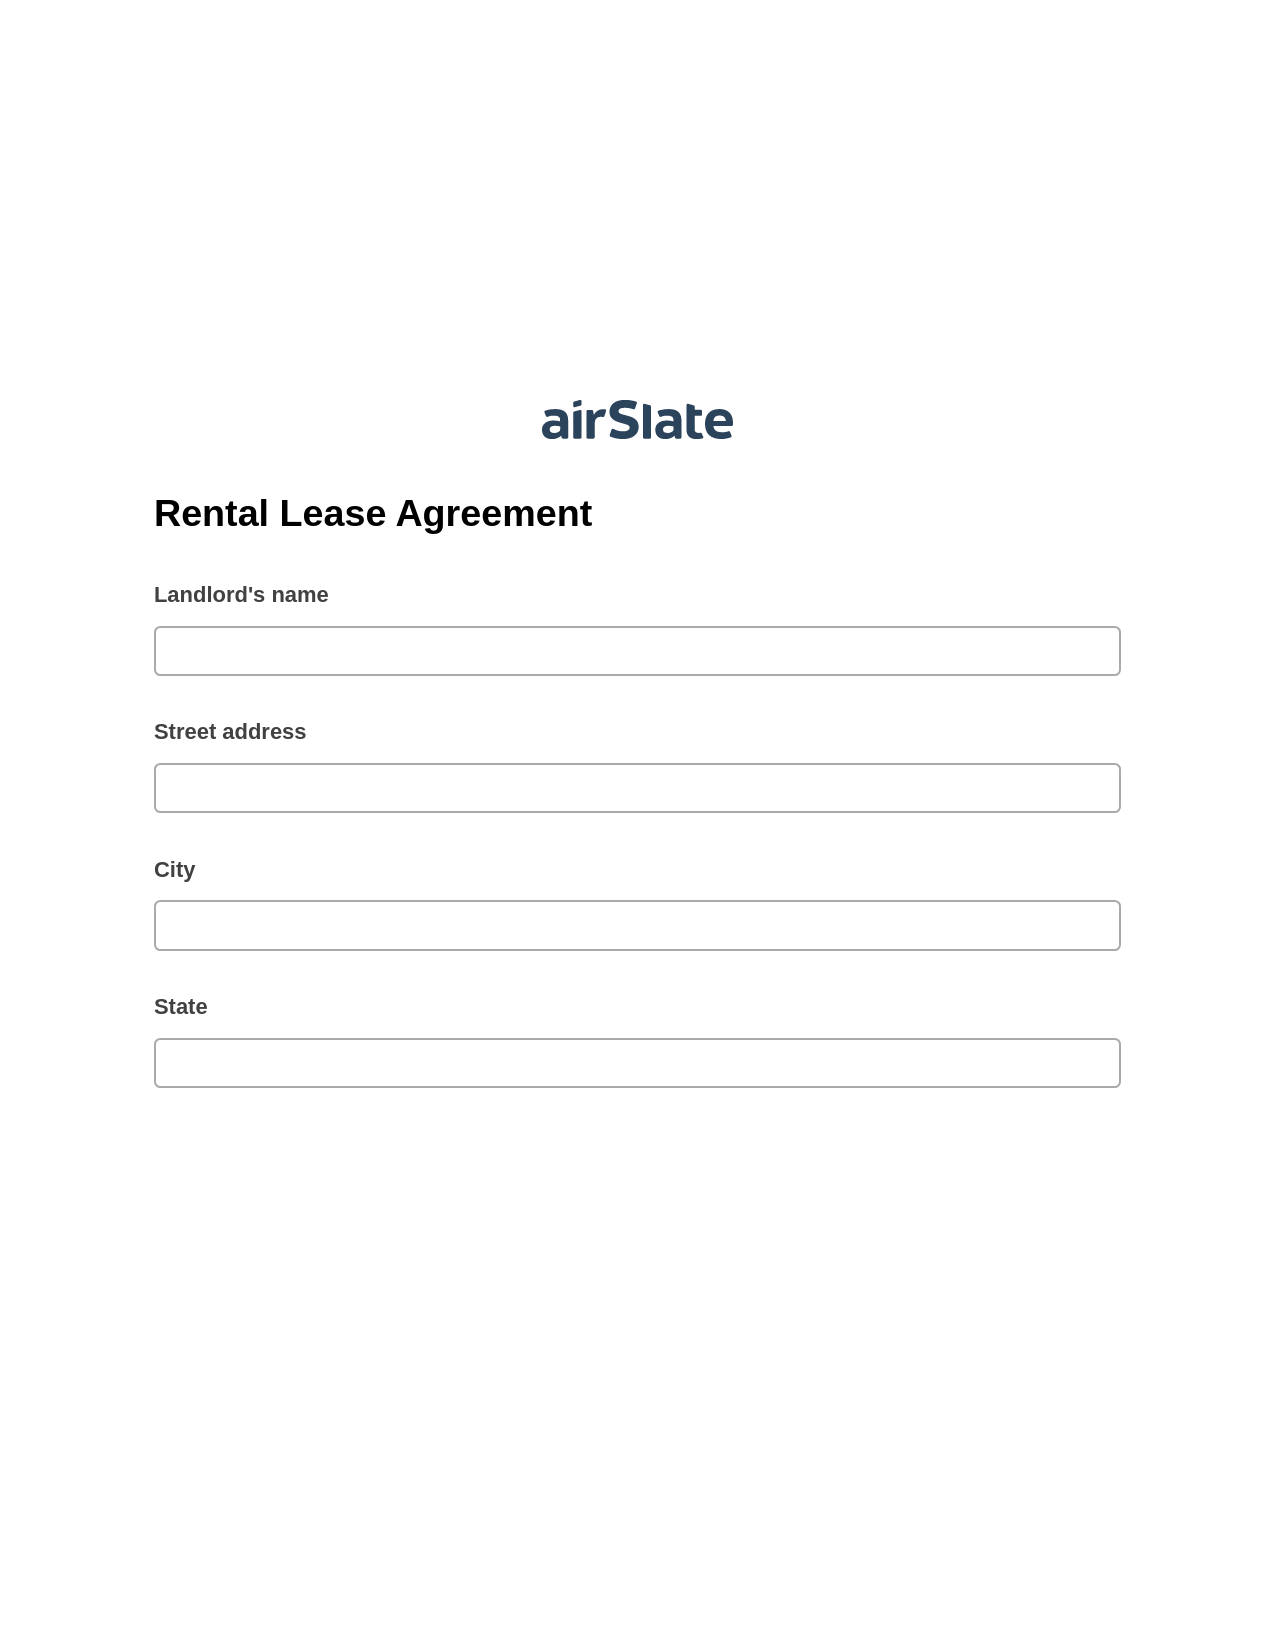 Rental Lease Agreement Pre-fill Dropdown from Airtable, Google Cloud Print Bot, Export to MySQL Bot